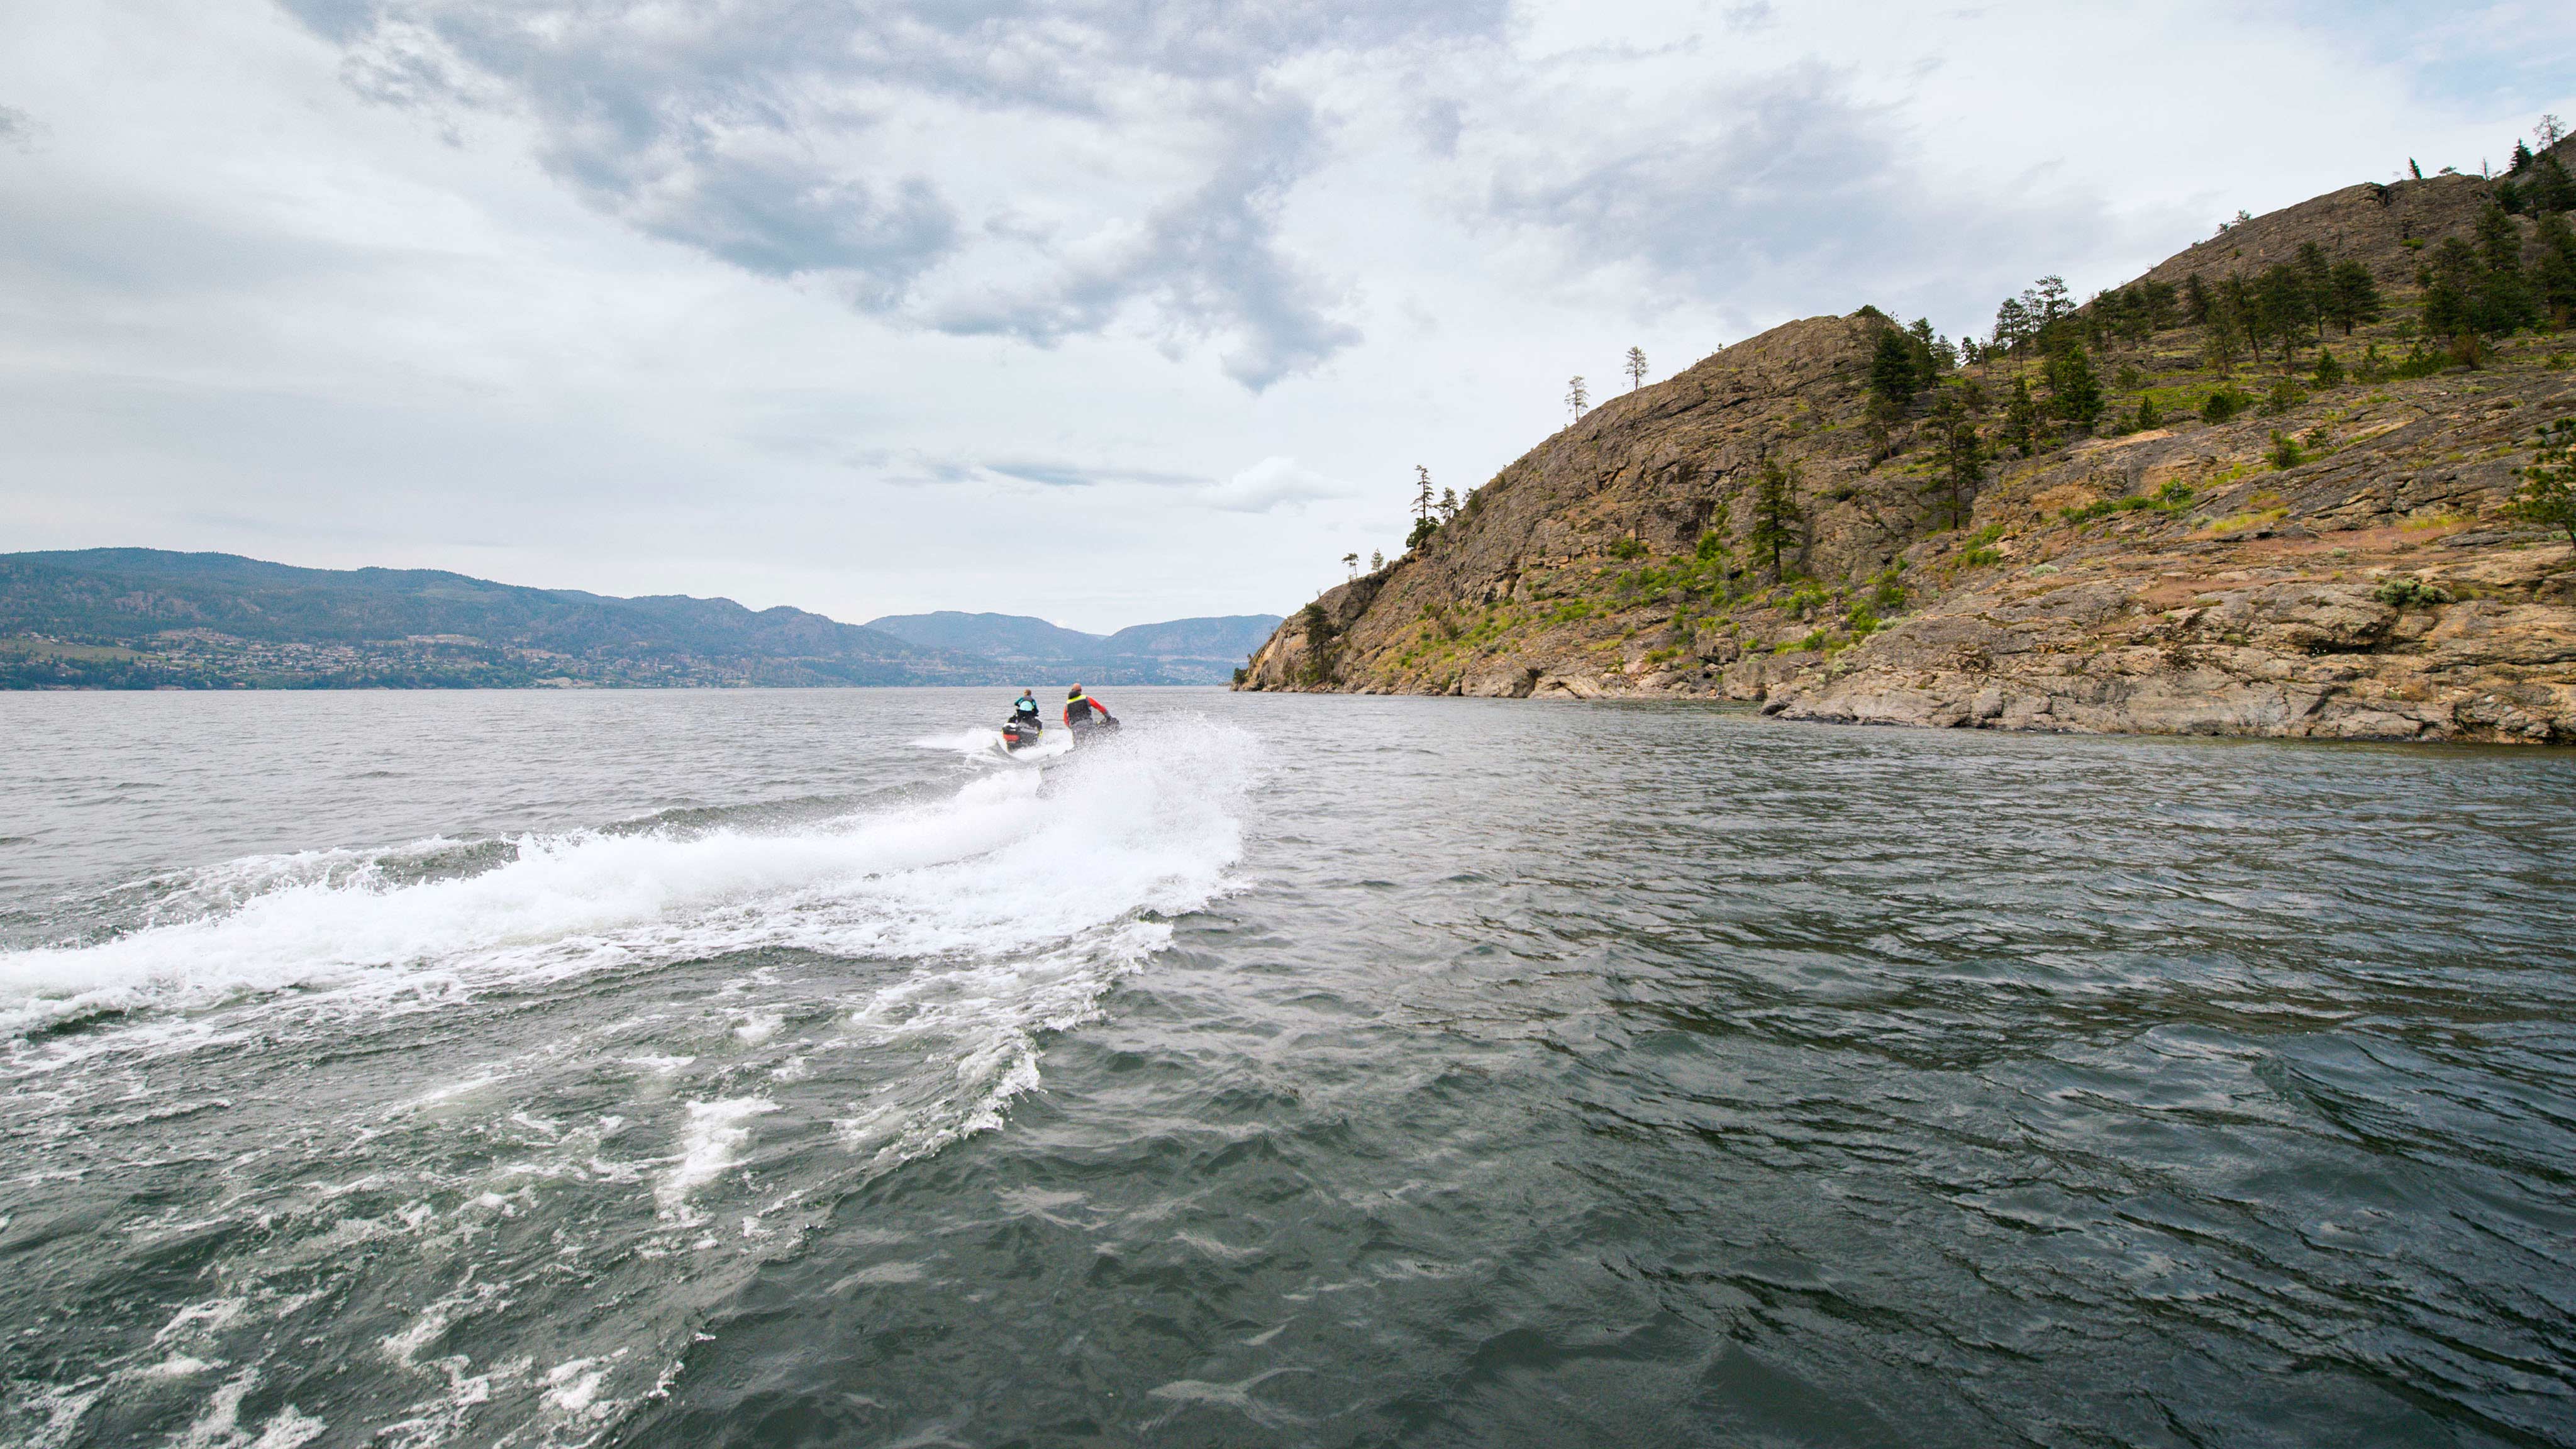 Two riders driving their new Sea-Doo Explorer Pro 170